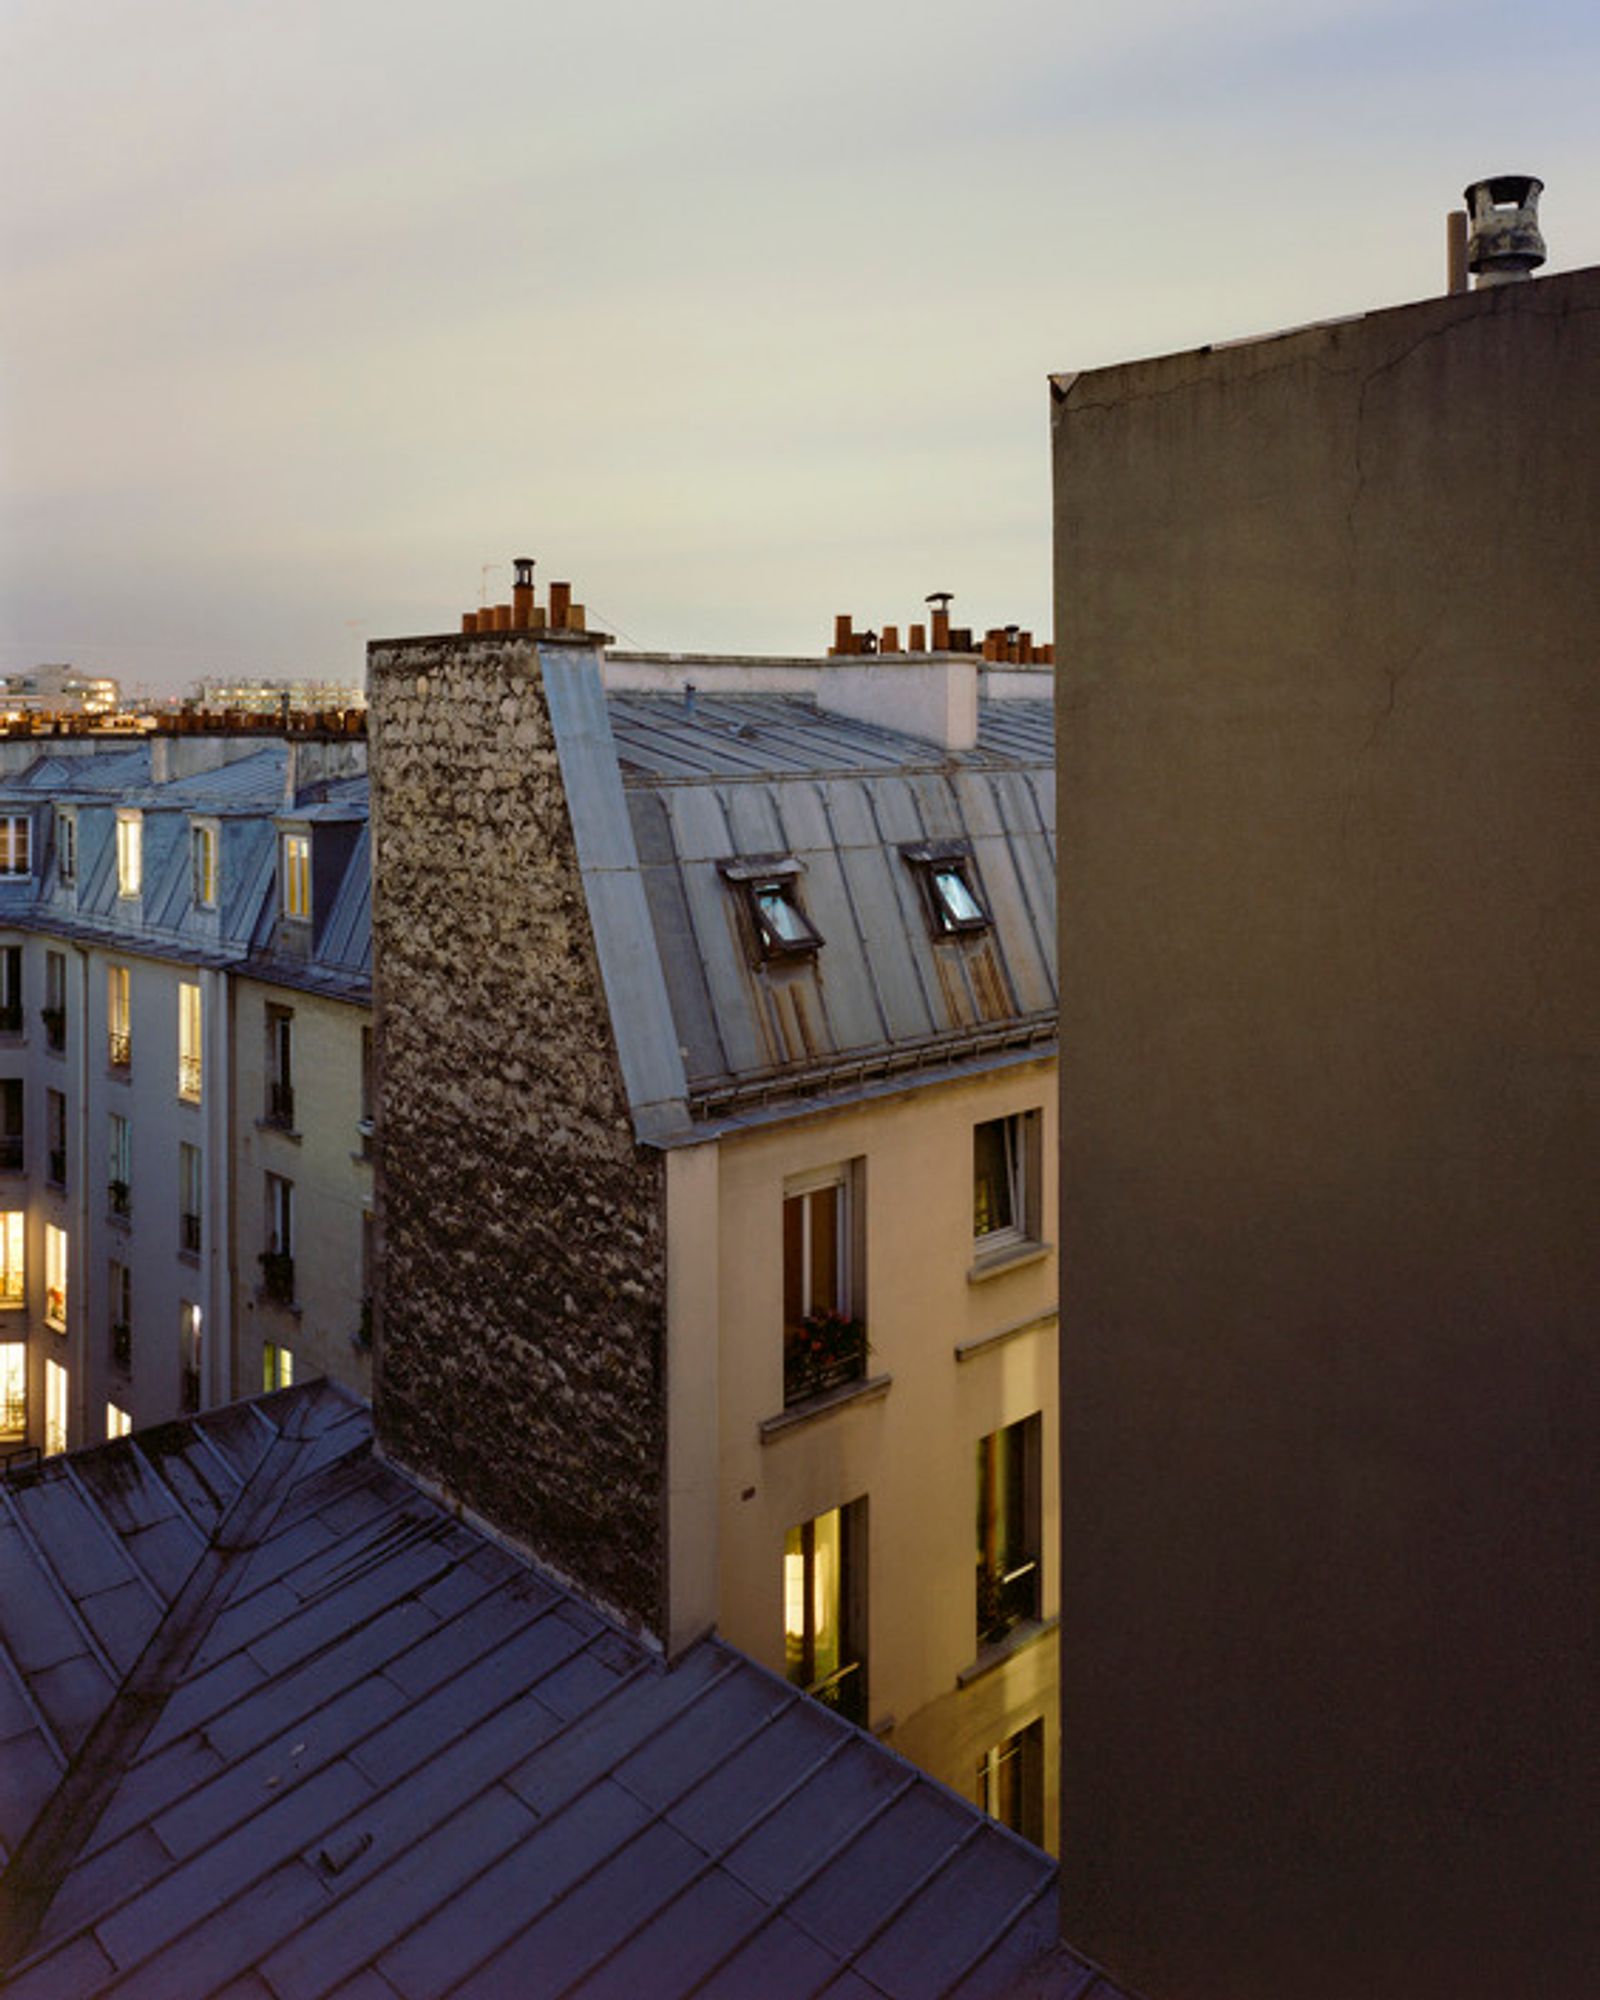 © Jordi Huisman - Image from the Rear Window photography project